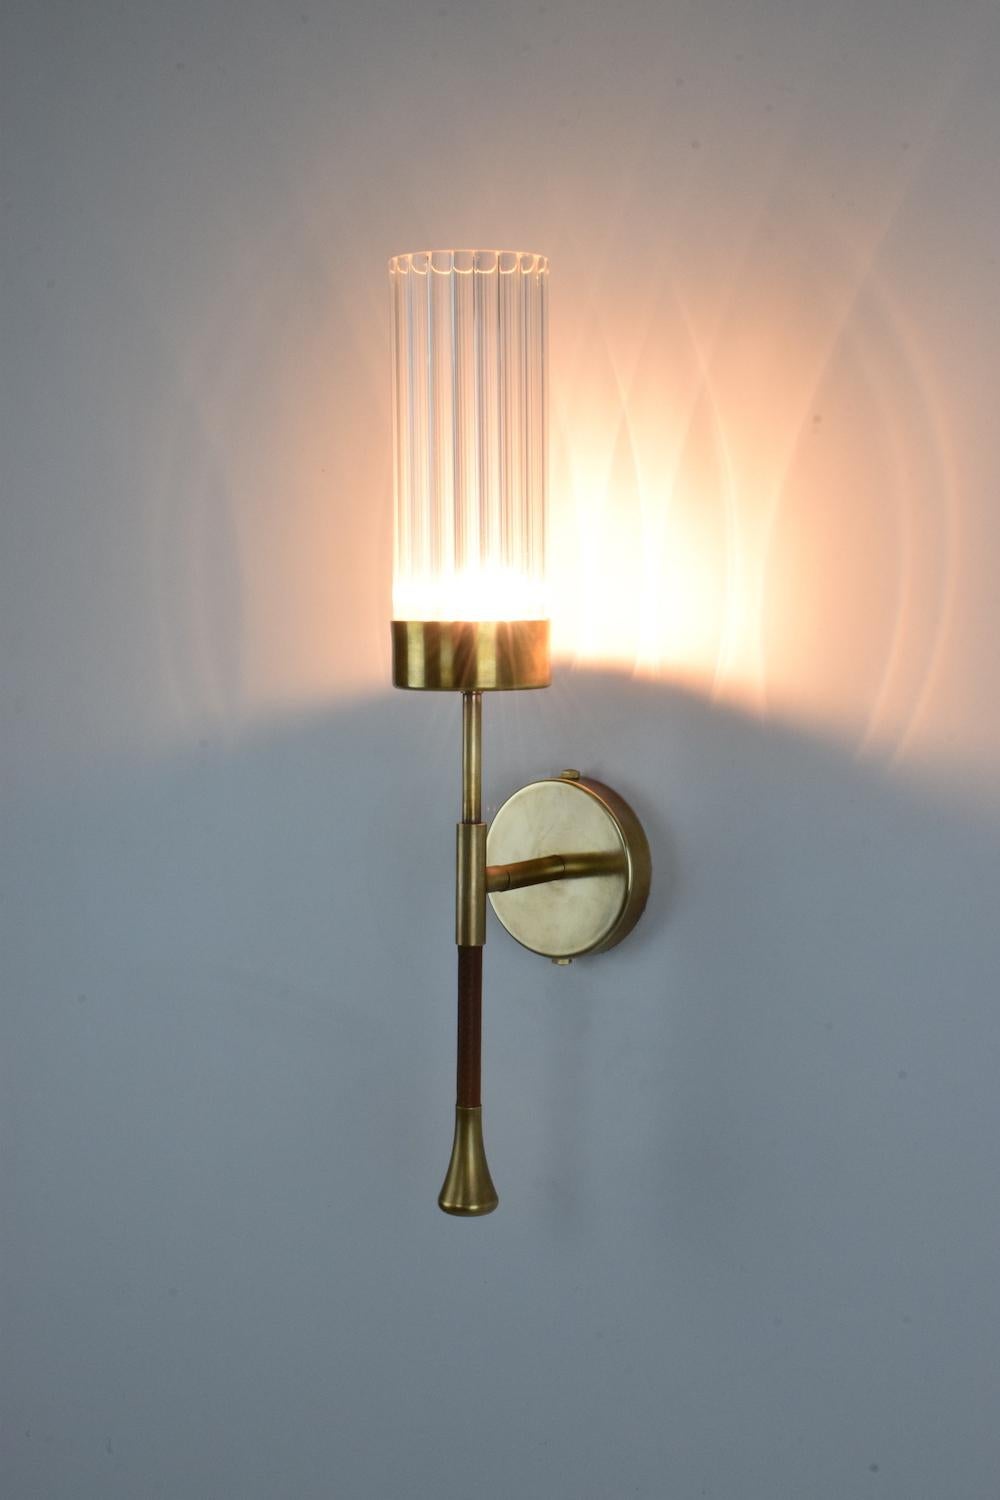 Designed in a timeless structure highlighted by a leather sheathed stem and cylindrical textured glass shade. Available as a single or double fixture and openwork brass details. 

Light source
1x60 W Max G9
230 V - LED Integrated
120 V -